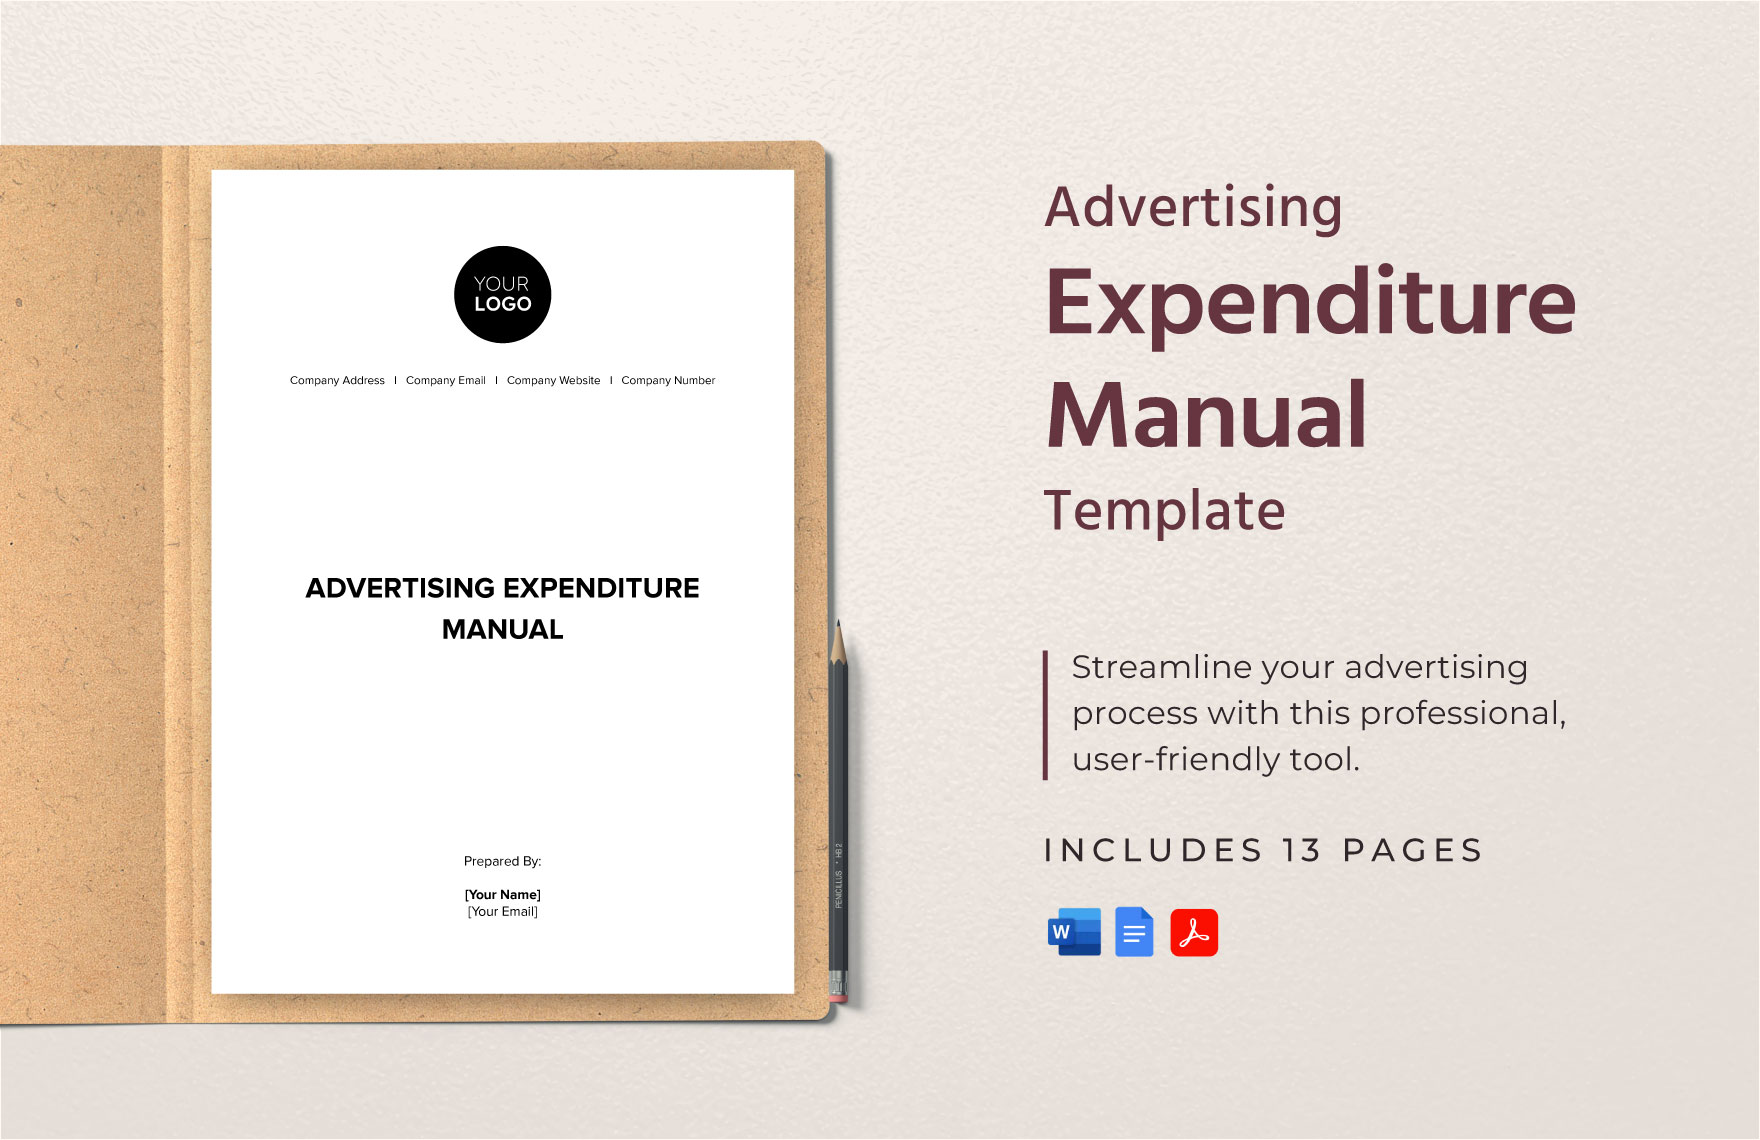 Advertising Expenditure Manual Template in Word, Google Docs, PDF